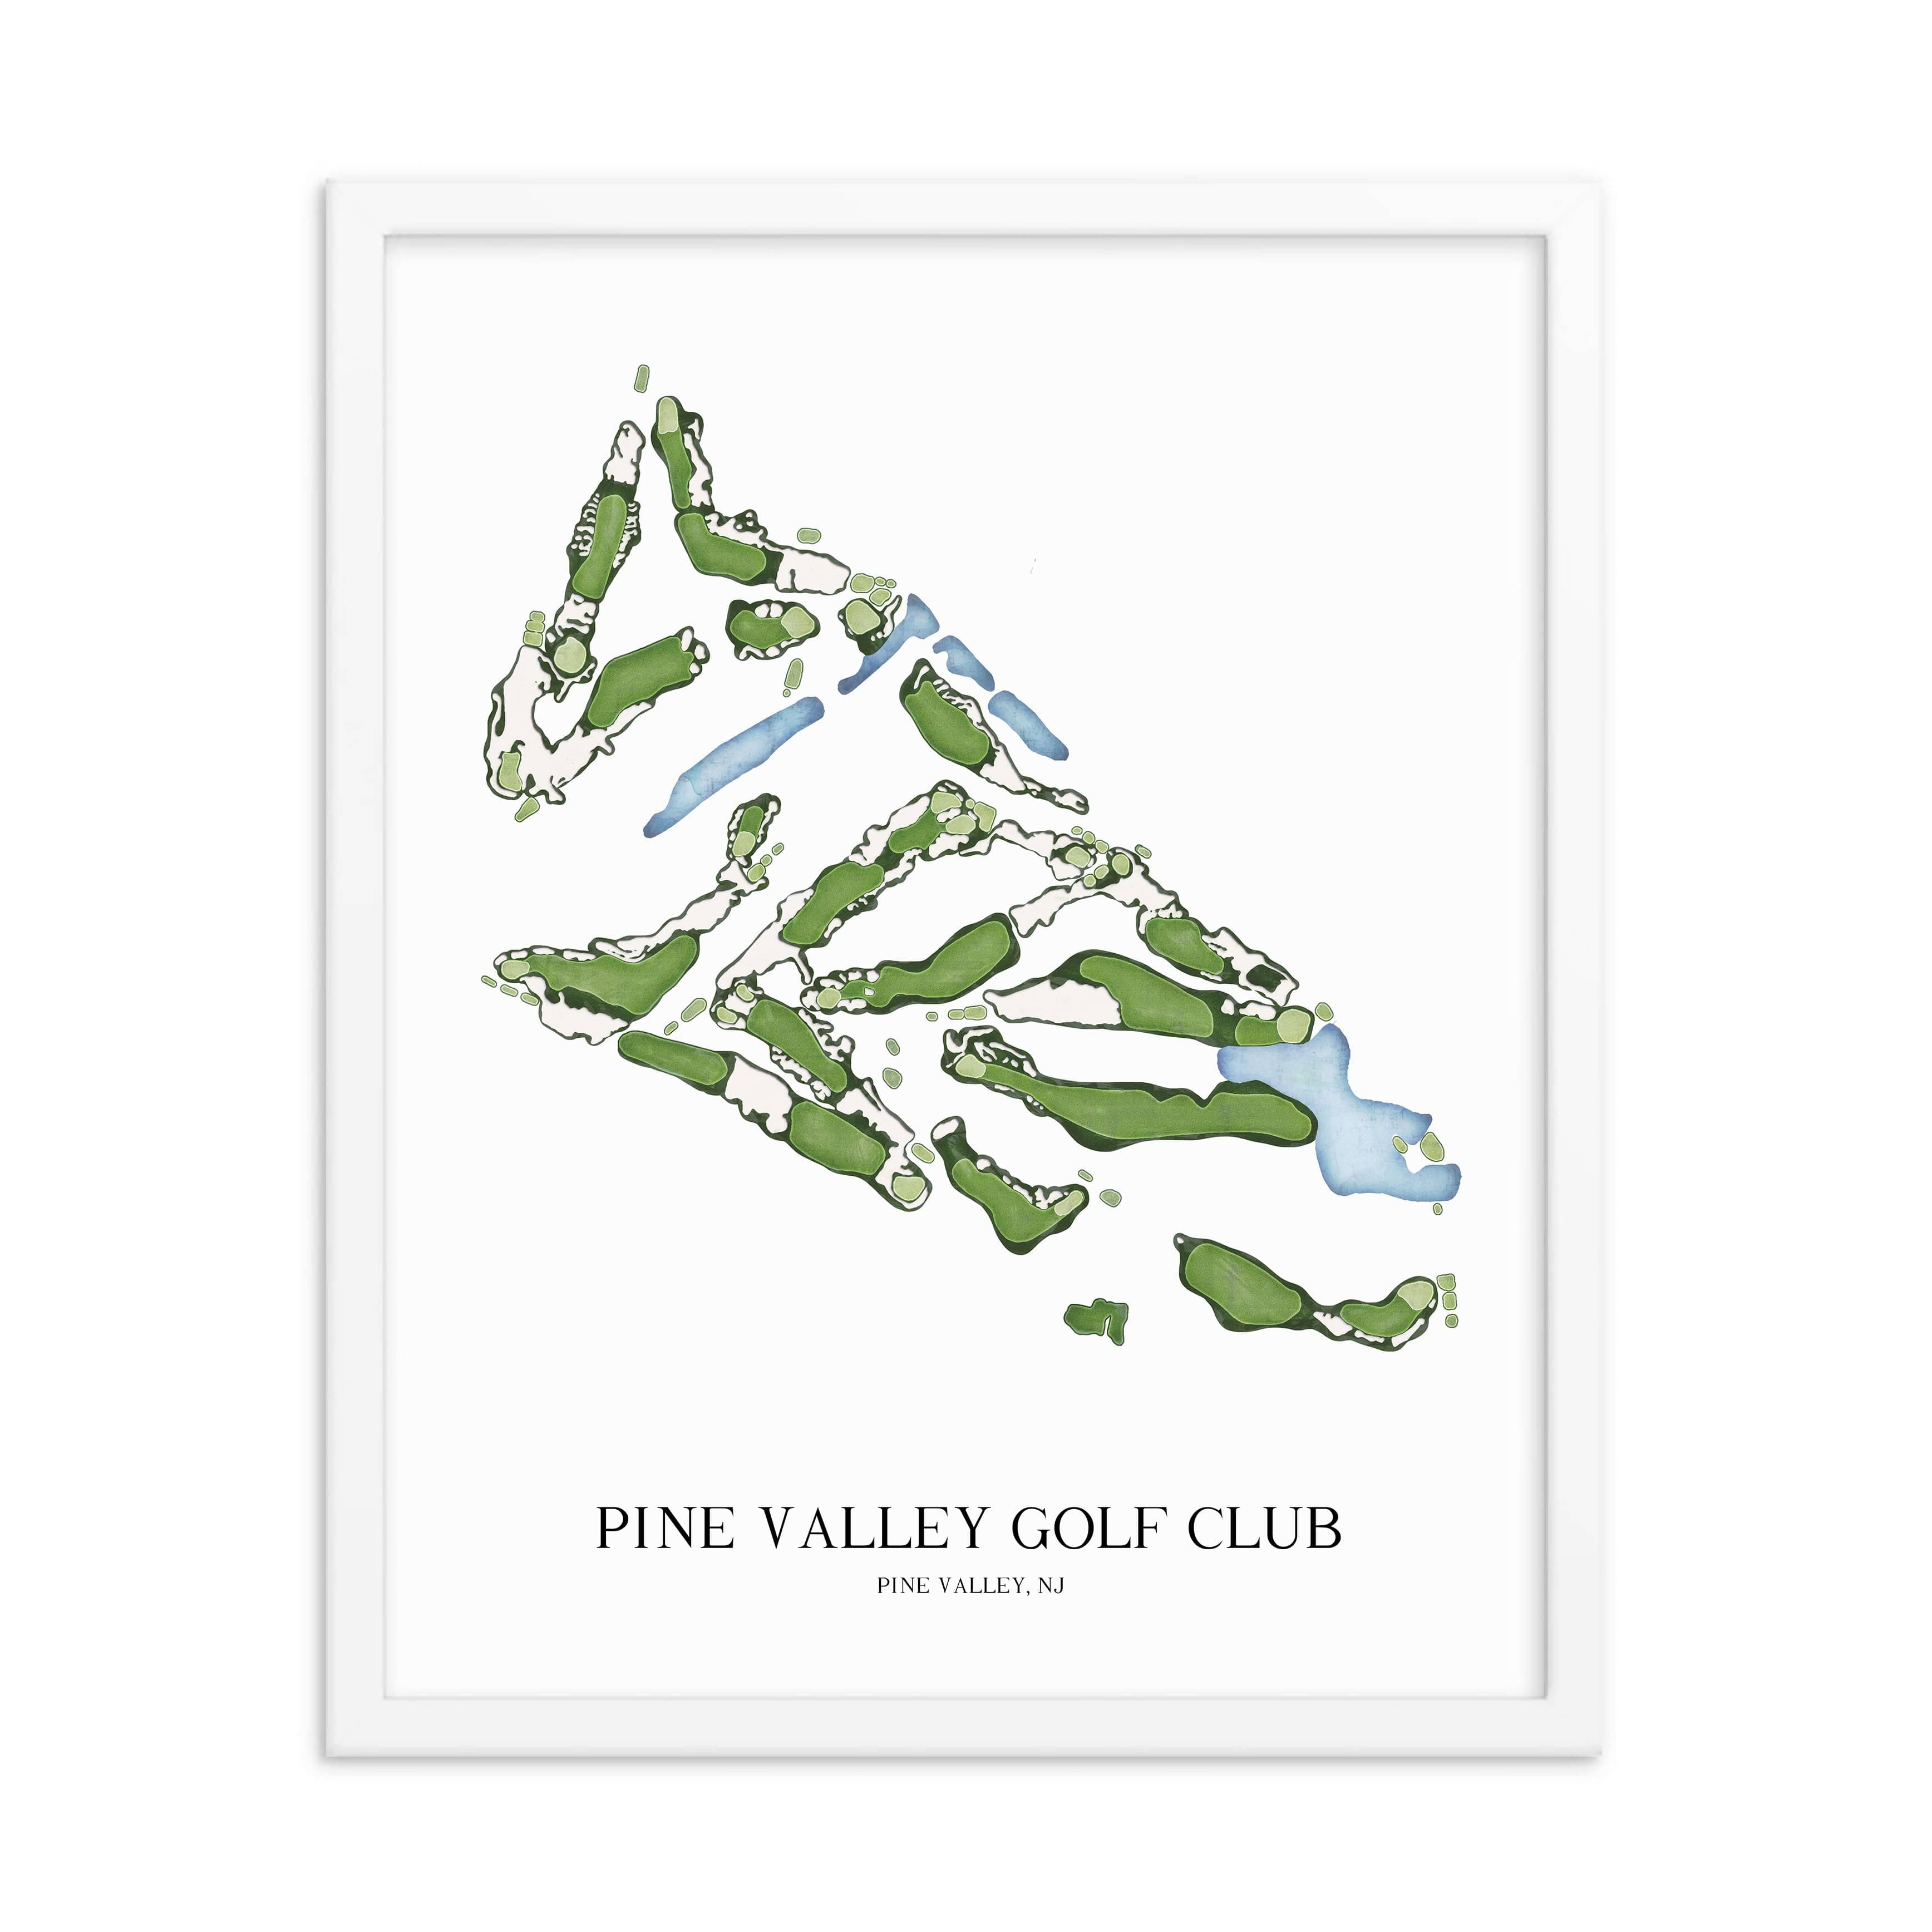 The 19th Hole Golf Shop - Golf Course Prints -  Pine Valley Golf Club Golf Course Map